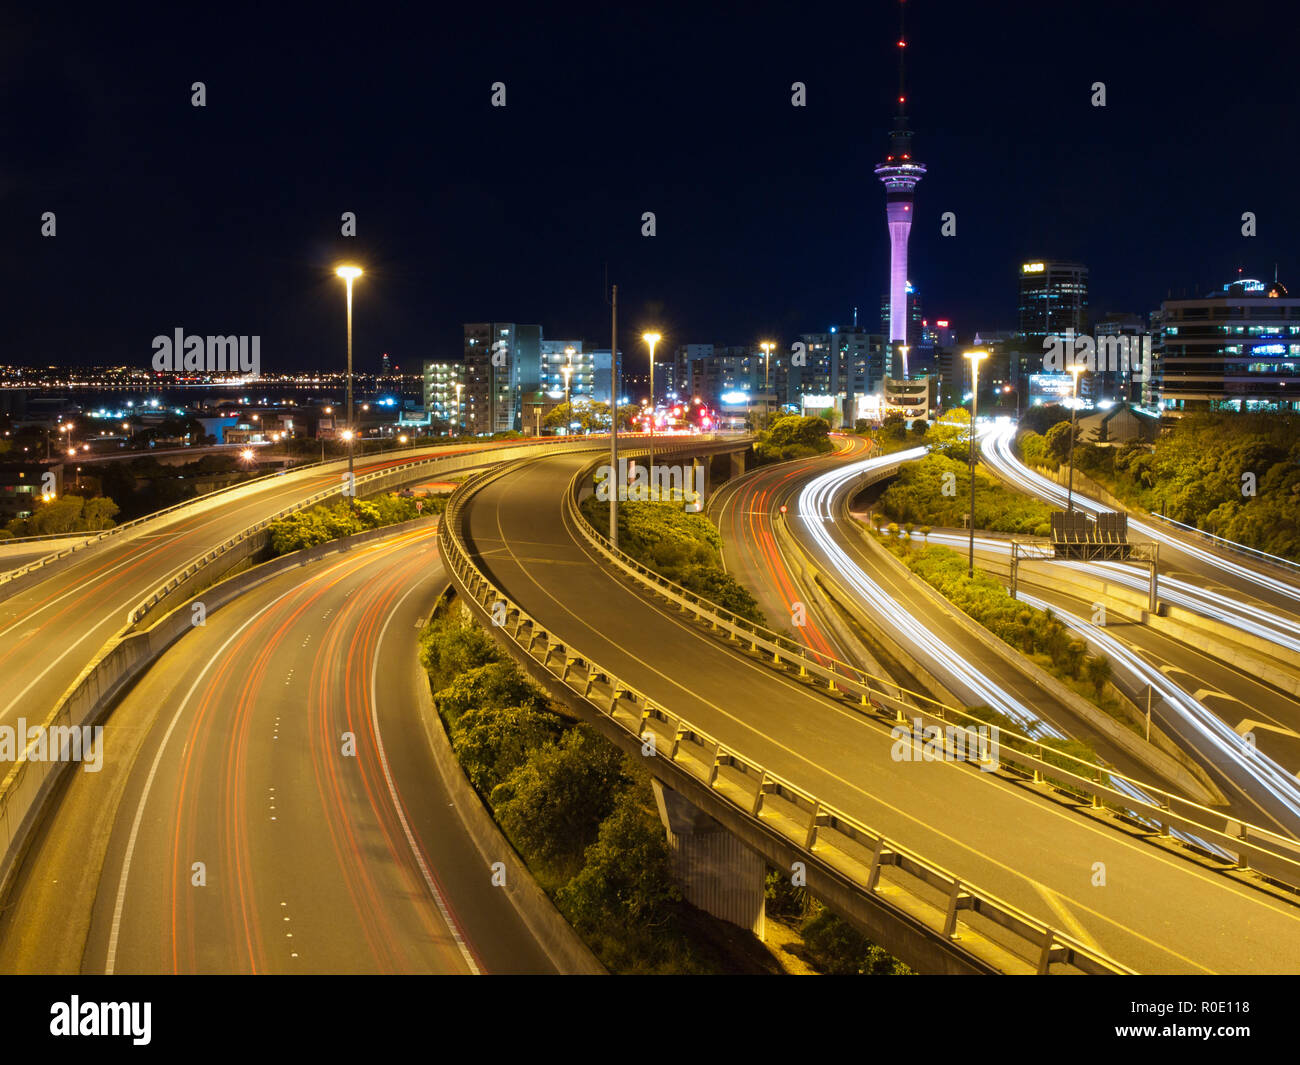 Night traffic in a major city in new zealand Stock Photo